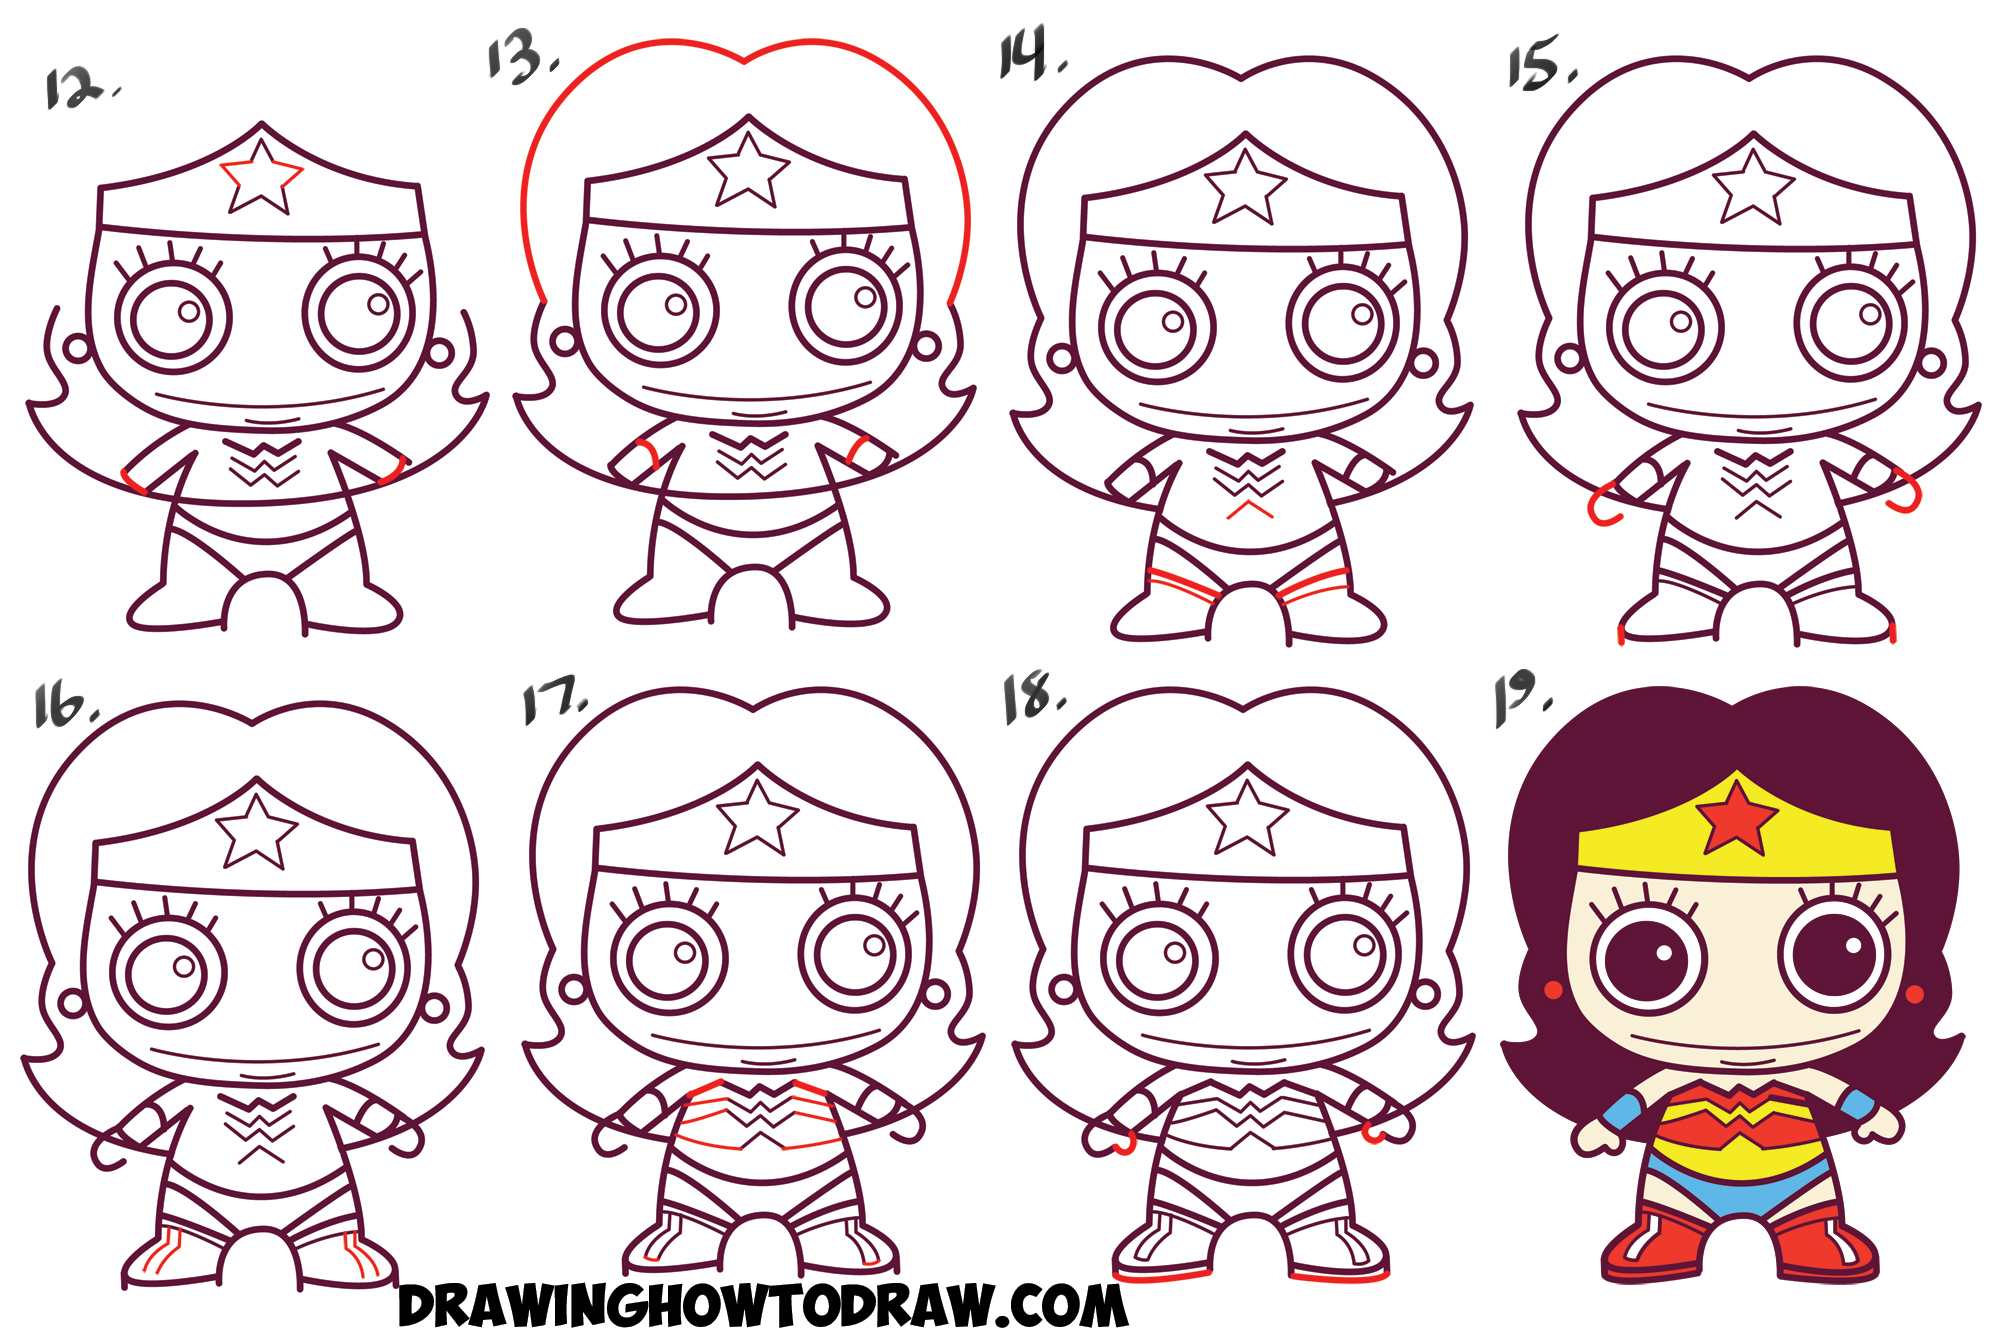 How to Draw Cute Chibi Wonder Woman from DC Comics in Easy Step by Step